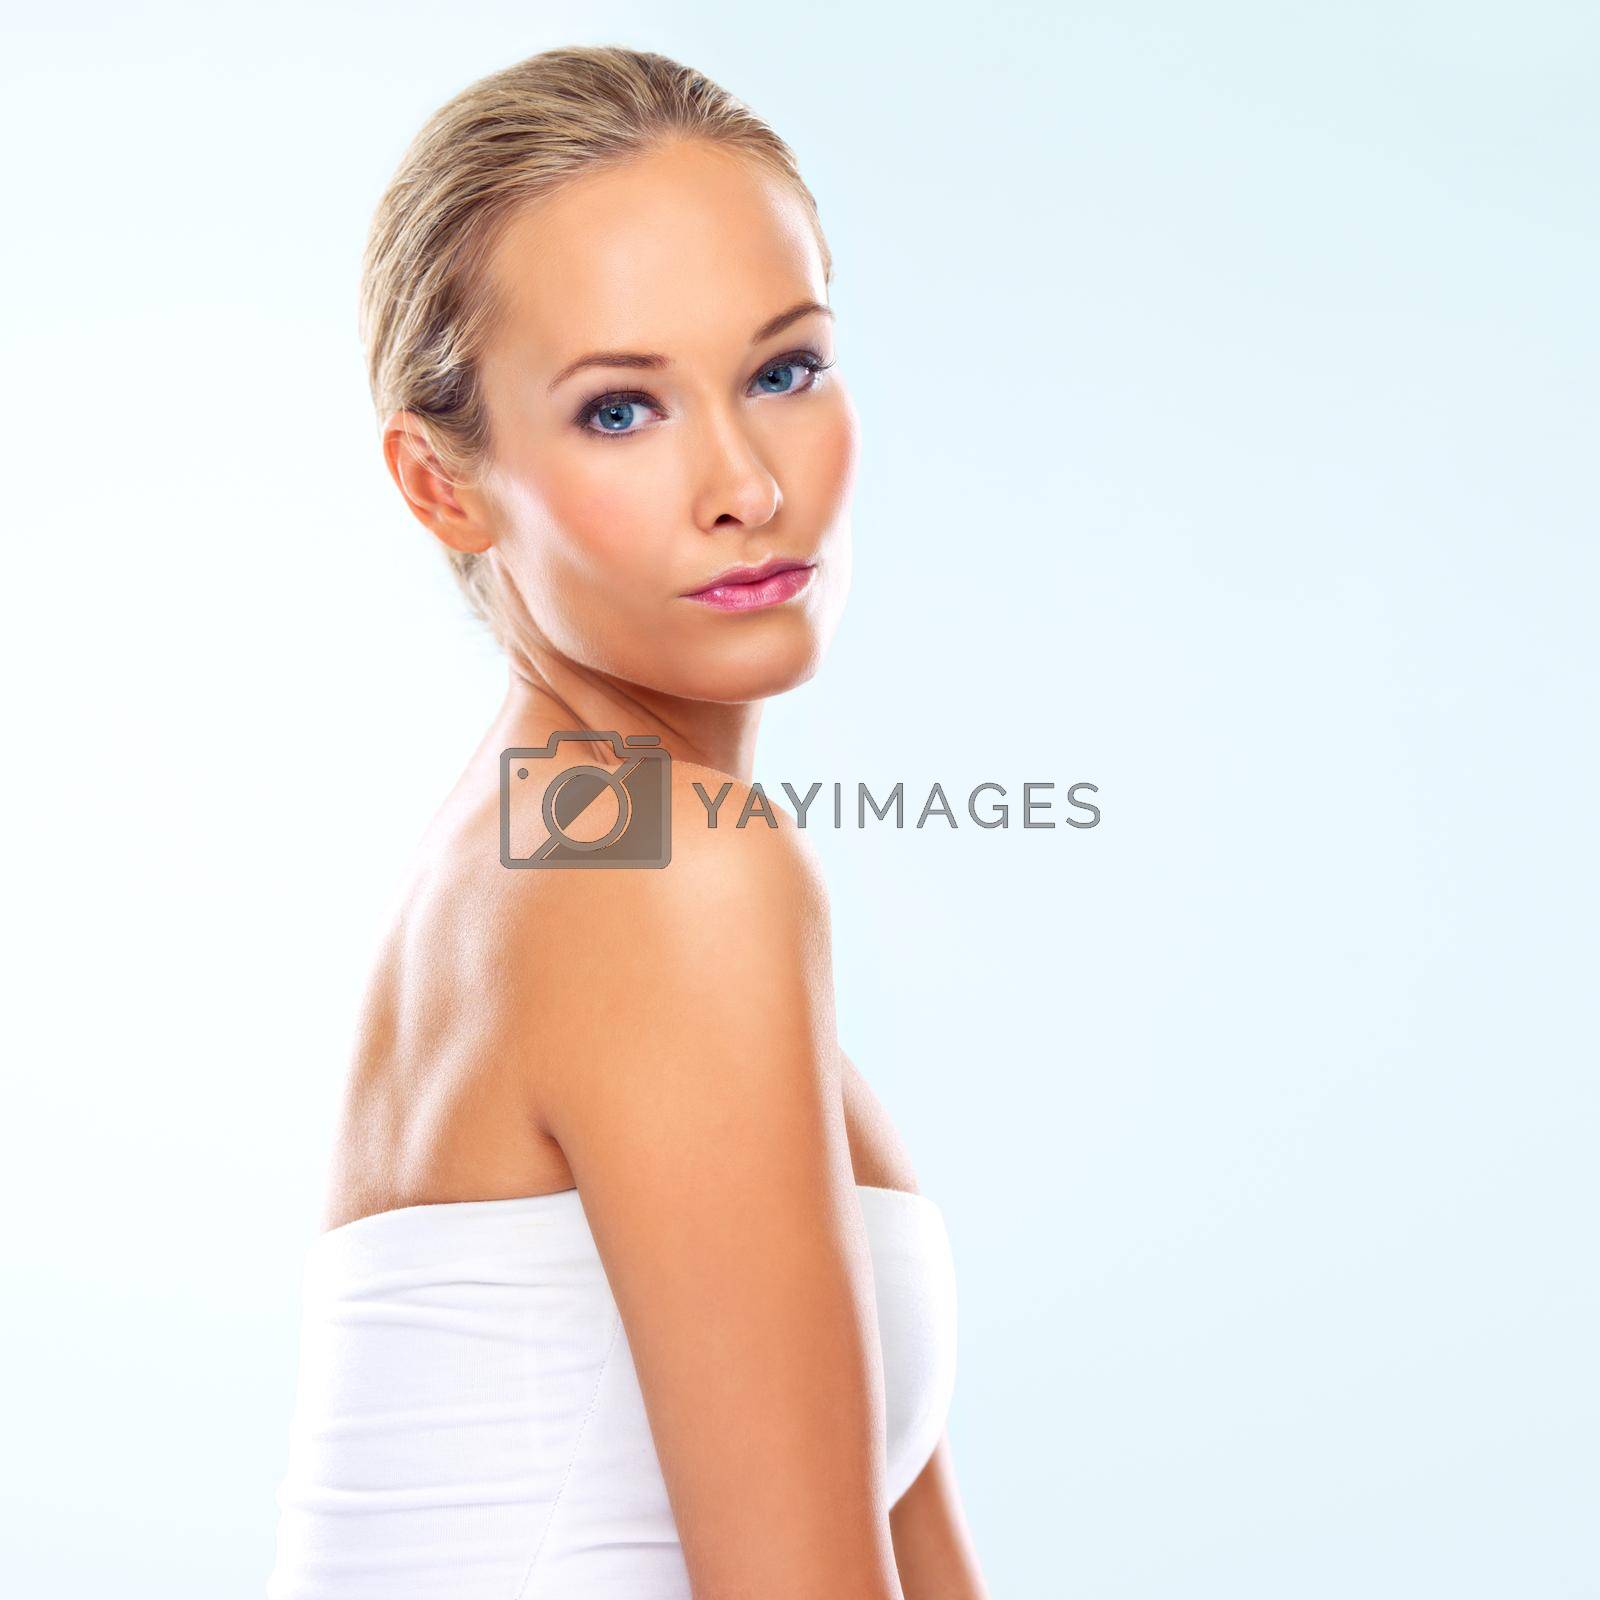 Royalty free image of Comfortable in her own skin. Studio portrait of an attractive blond woman. by YuriArcurs